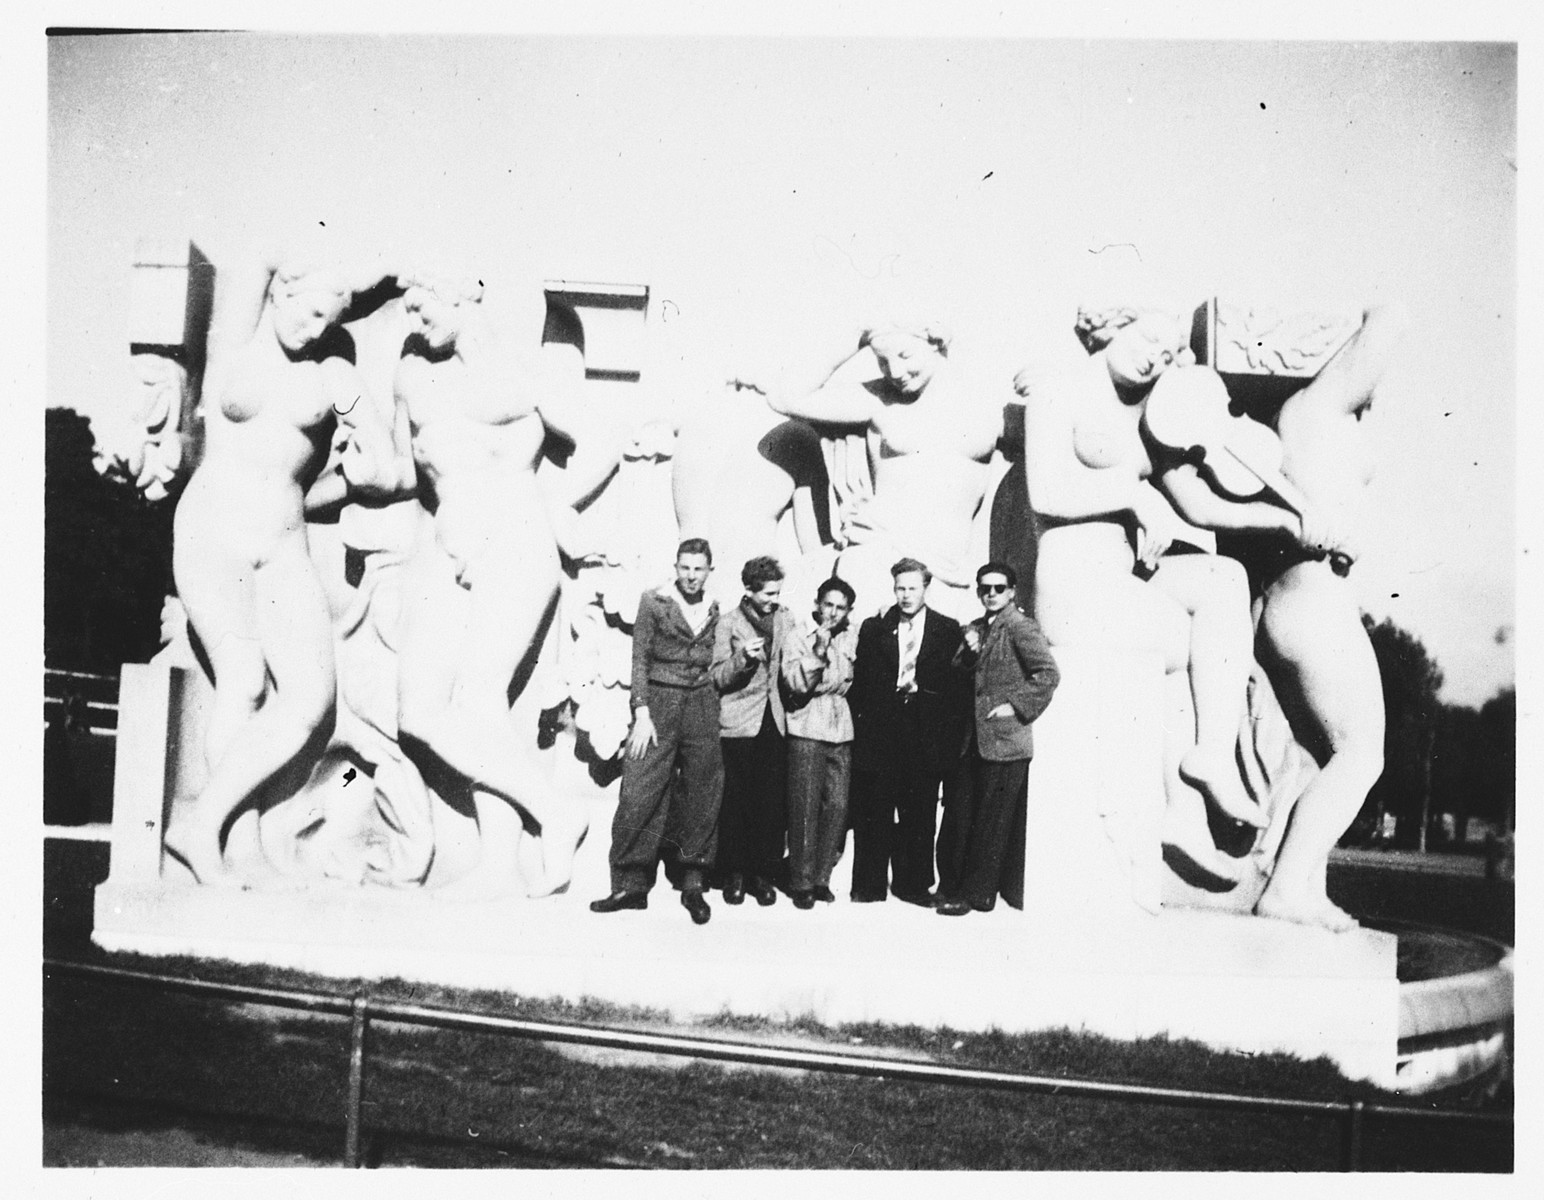 Teenagers from the rue Rollin youth home pose in front of a statue in Paris.

Among those pictured are Herbert Karliner and Lutz Scheucher.